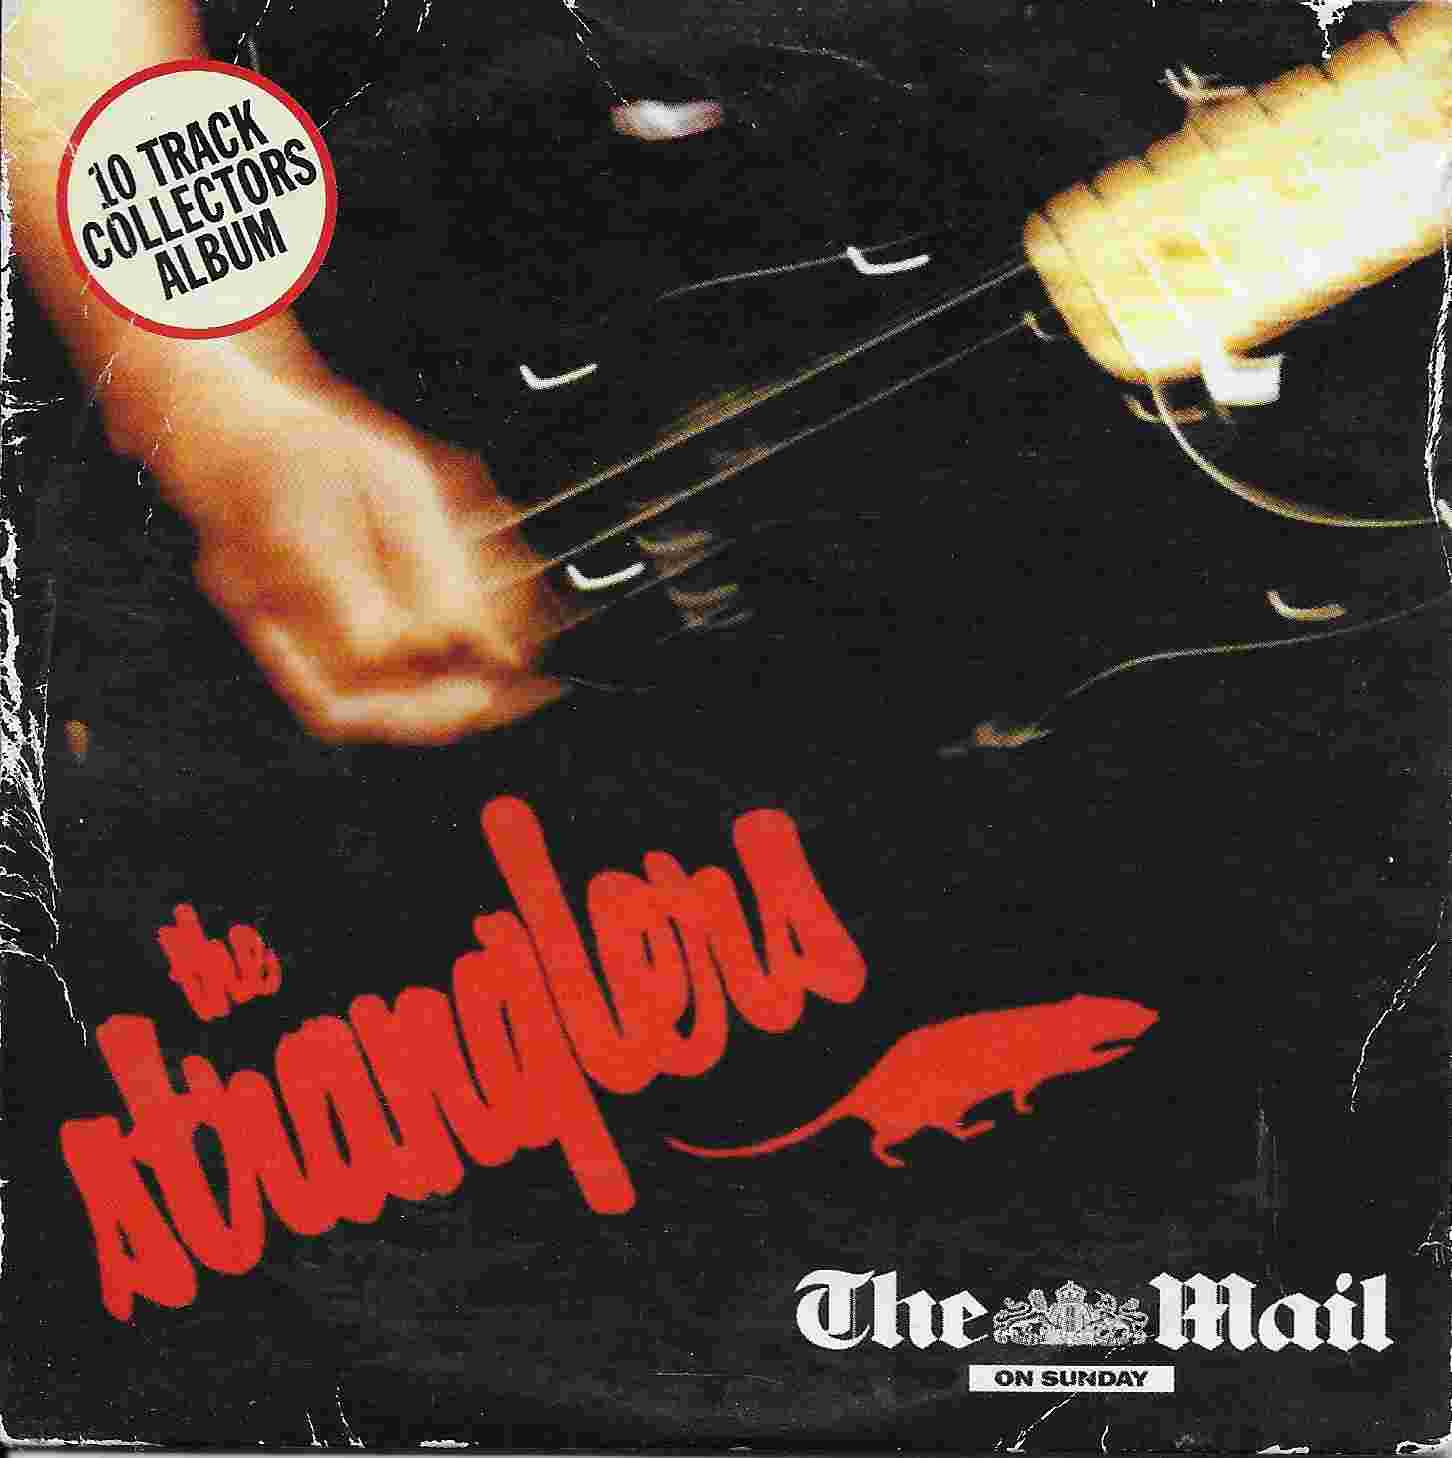 Picture of 2100000 486526 10 track collectors album by artist The Stranglers 